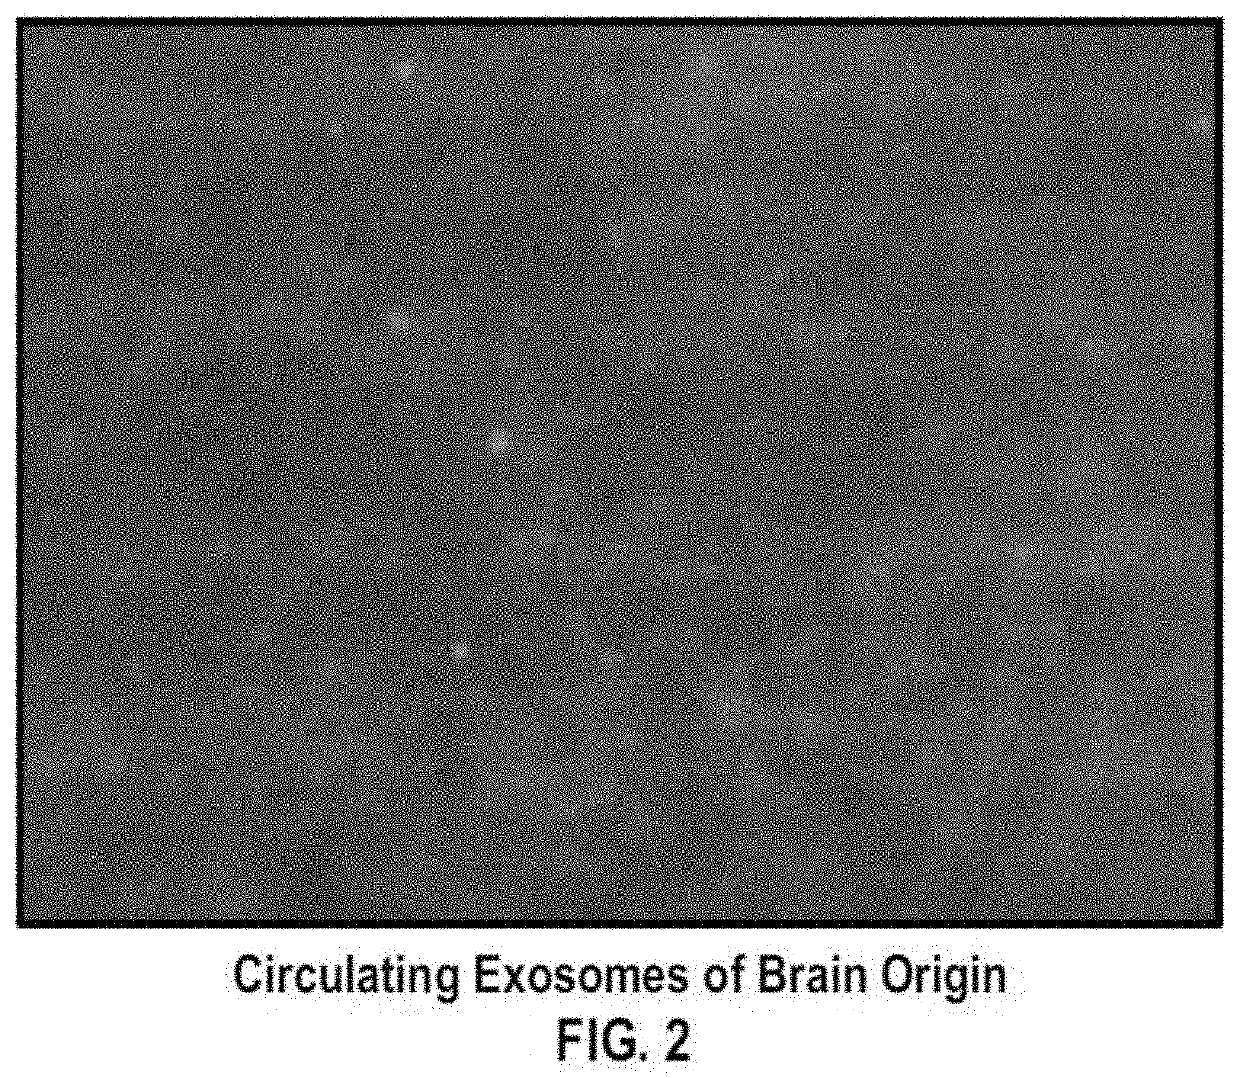 Brain specific exosome based diagnostics and extracorporeal therapies